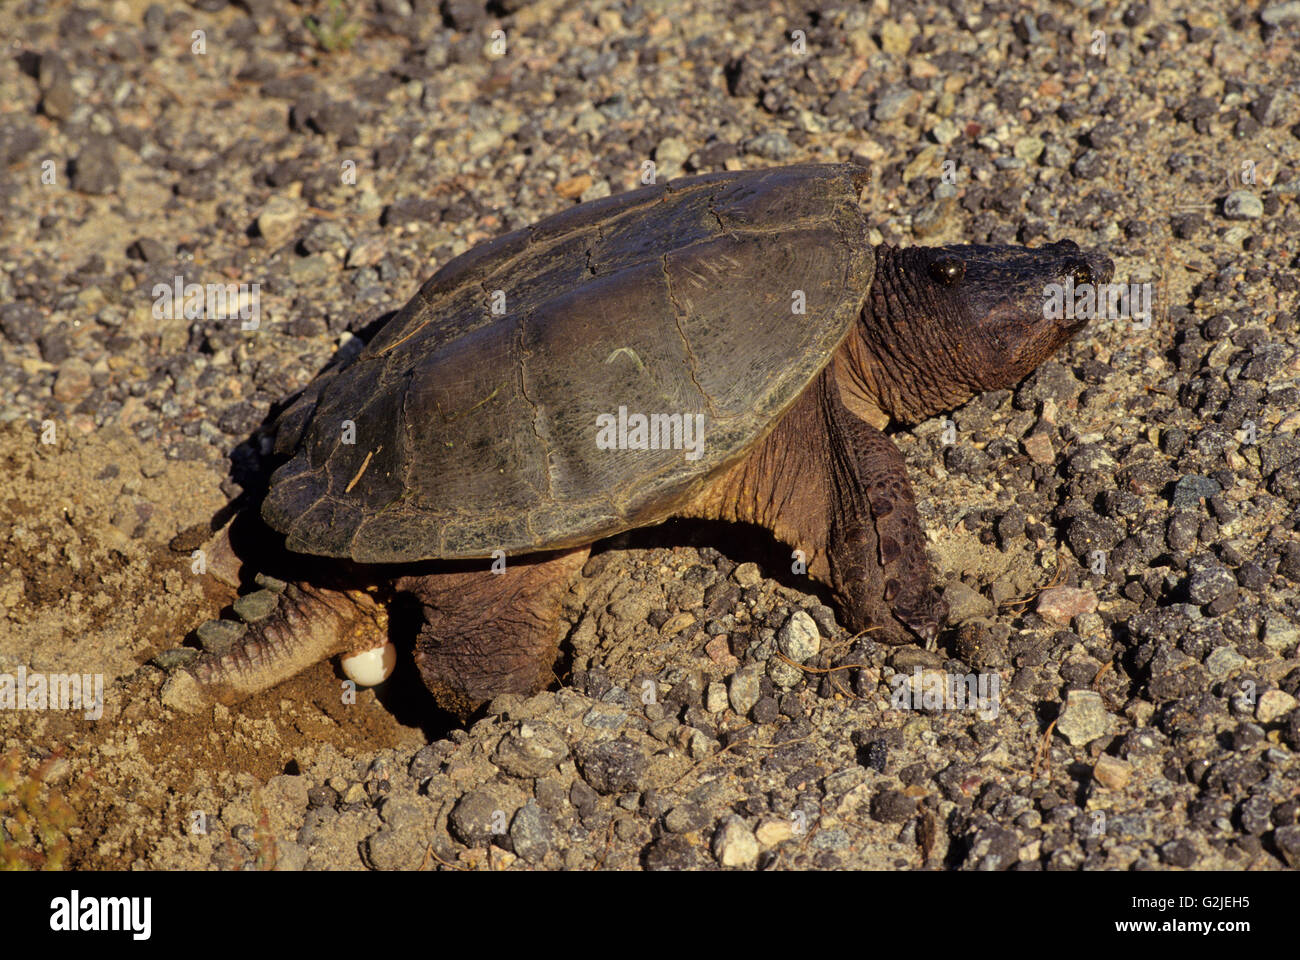 Snapping (Chelydra serpentina) Turtle laying eggs in Algonquin Provincial Park, Central Ontario, Canada. Stock Photo